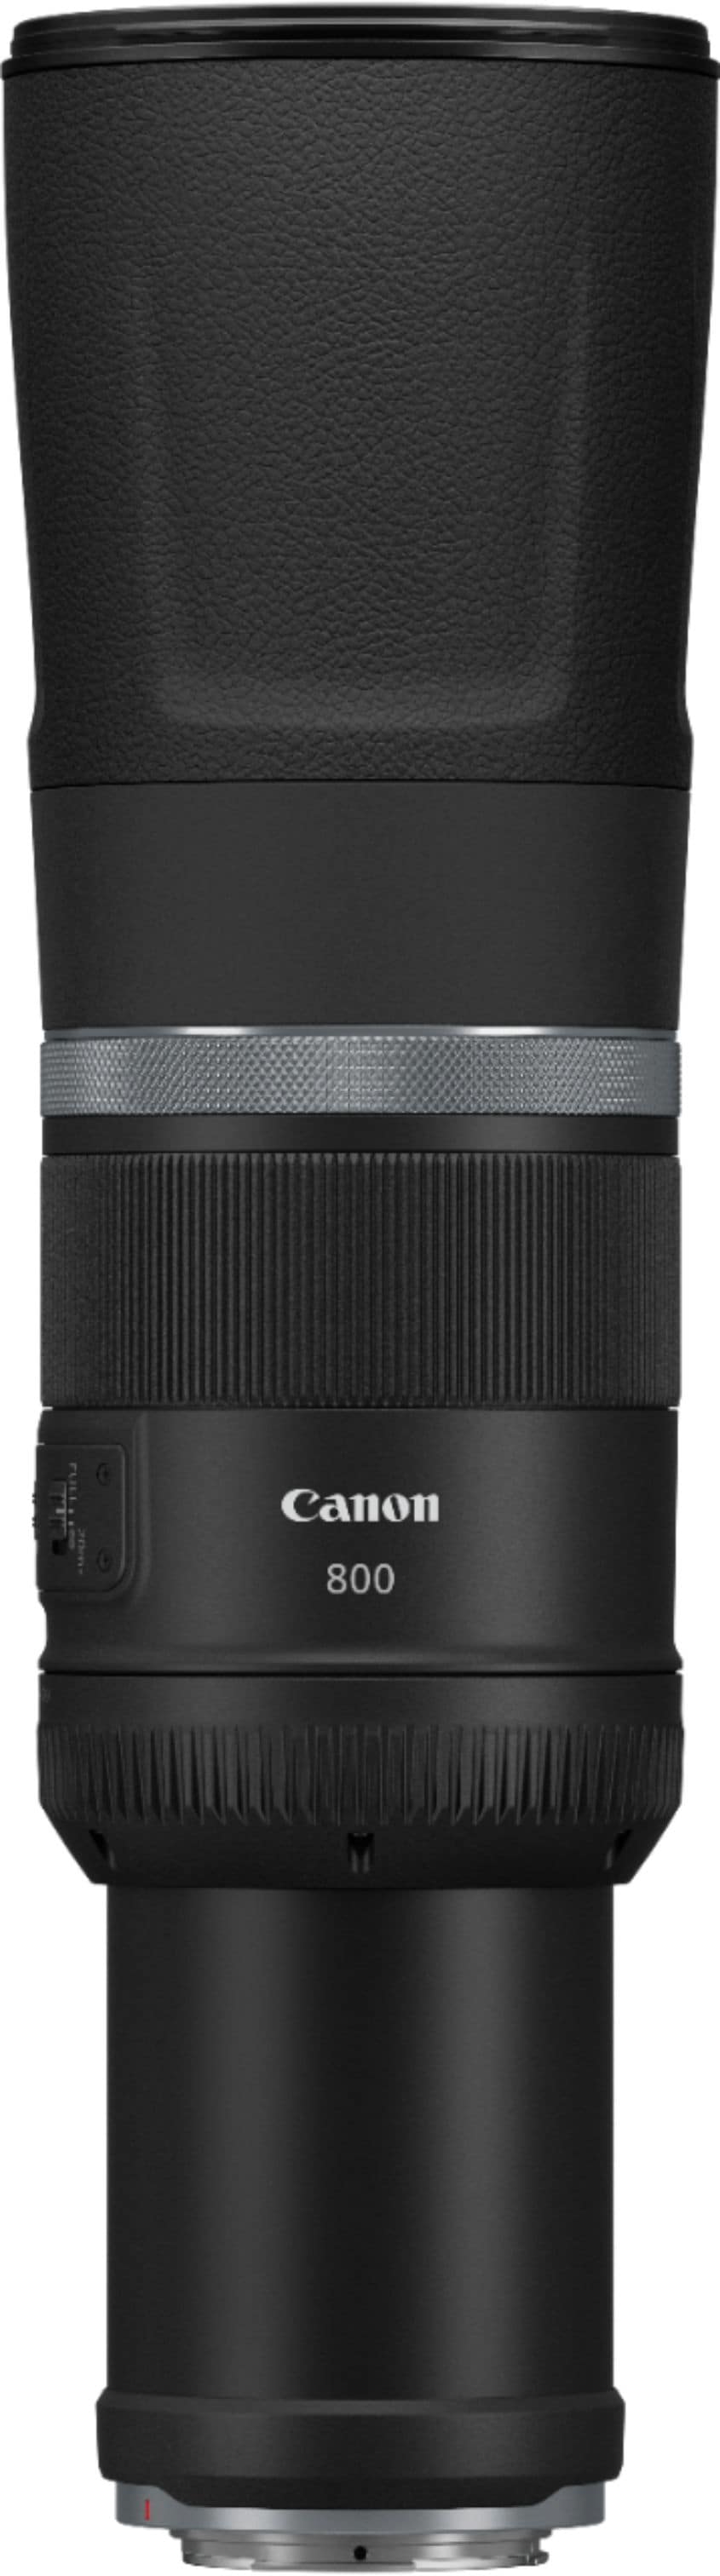 Canon - RF 800mm f/11  IS STM Telephoto Lens for EOS R Cameras - Black_4